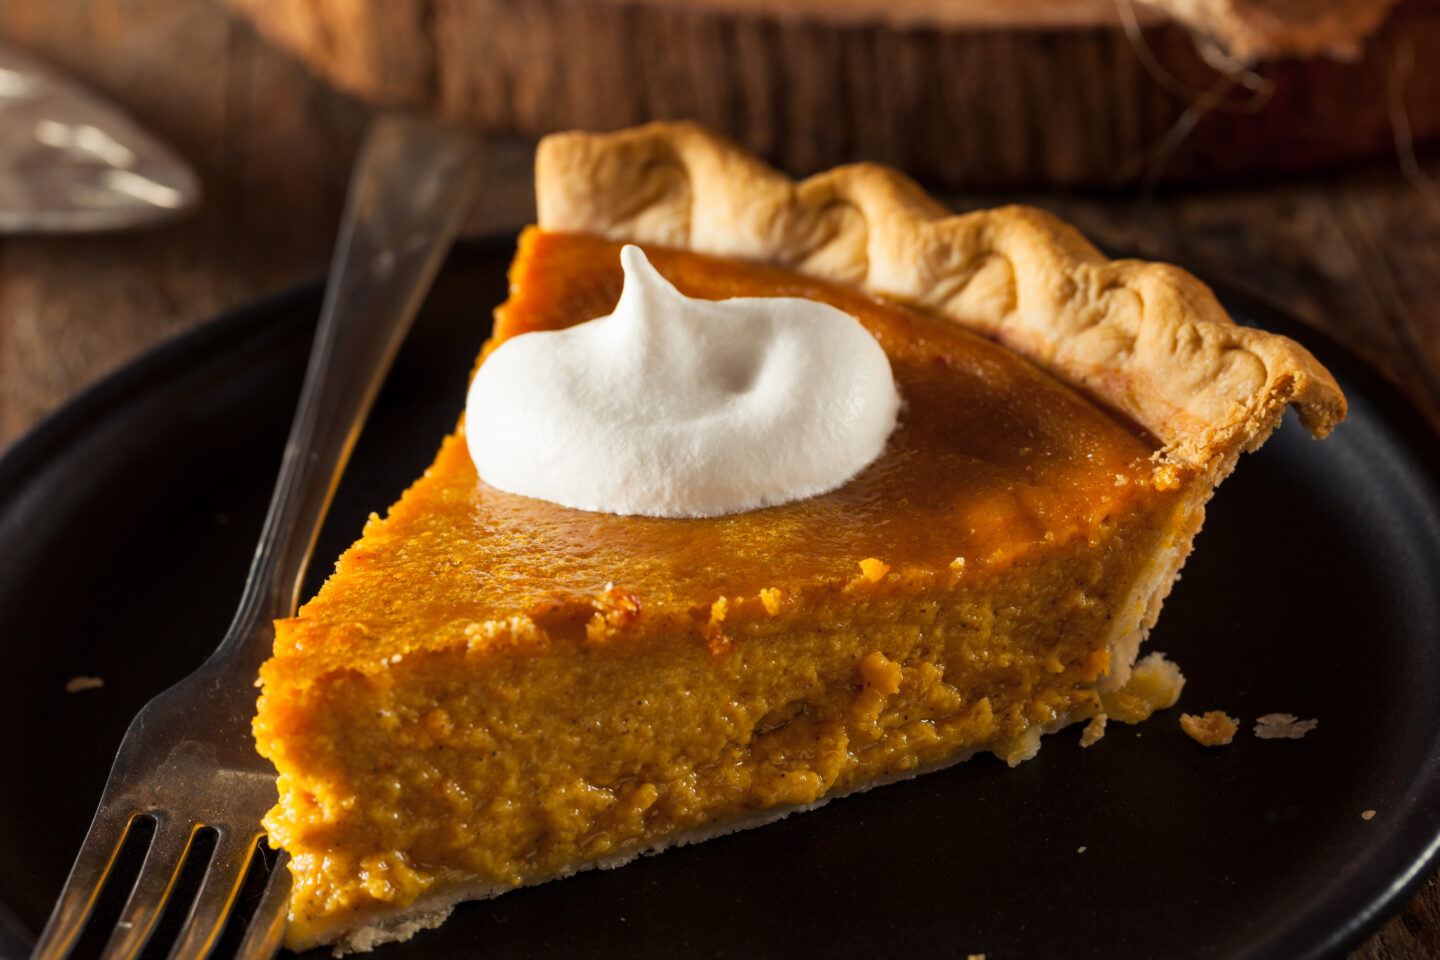 Delicious slice of pumpkin pie with a dollop of whipped cream